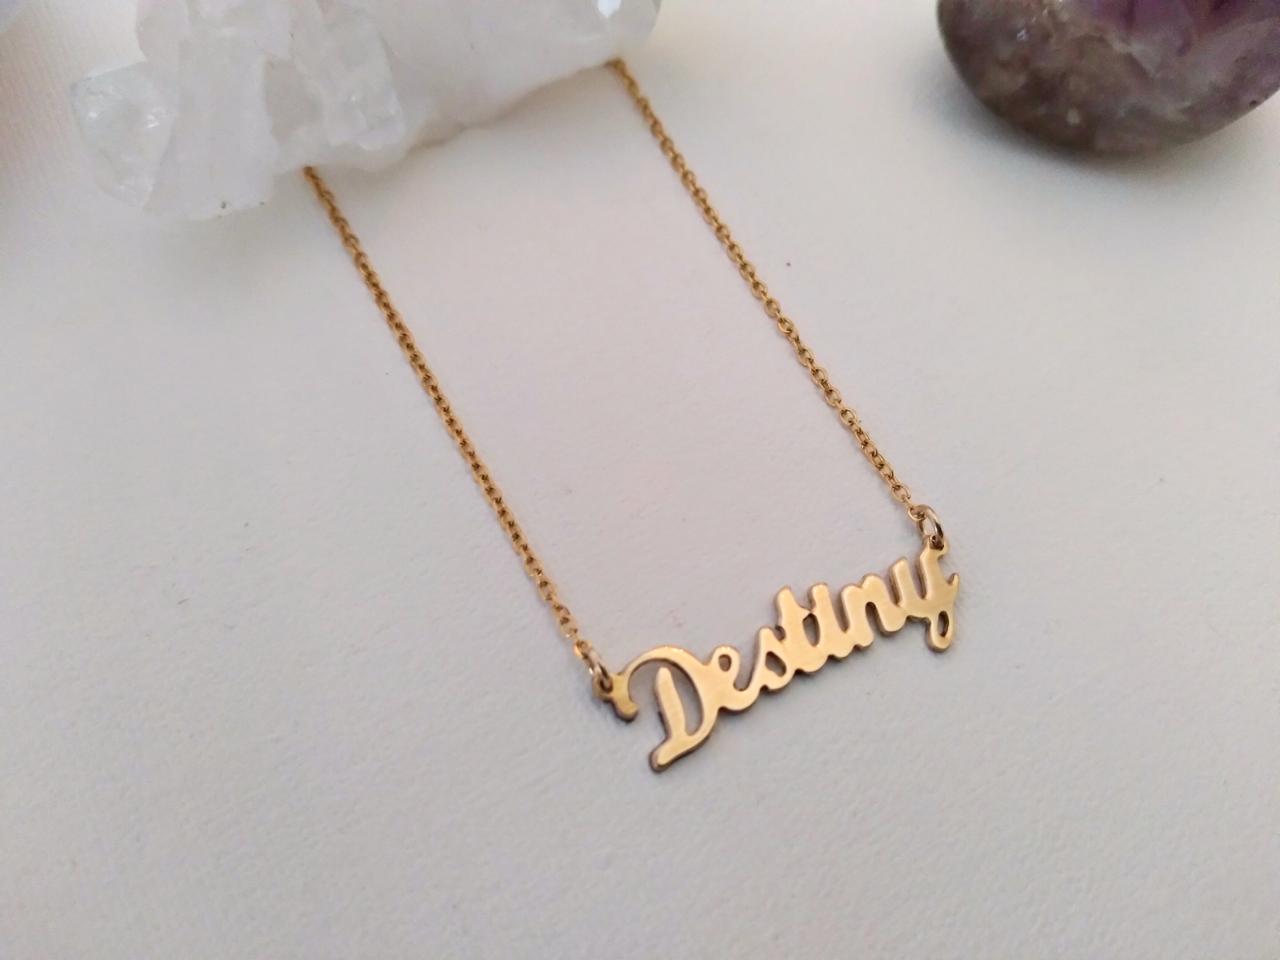 Name Necklace, Personalized Jewelry, Personalized Necklace, Name Plate Necklace